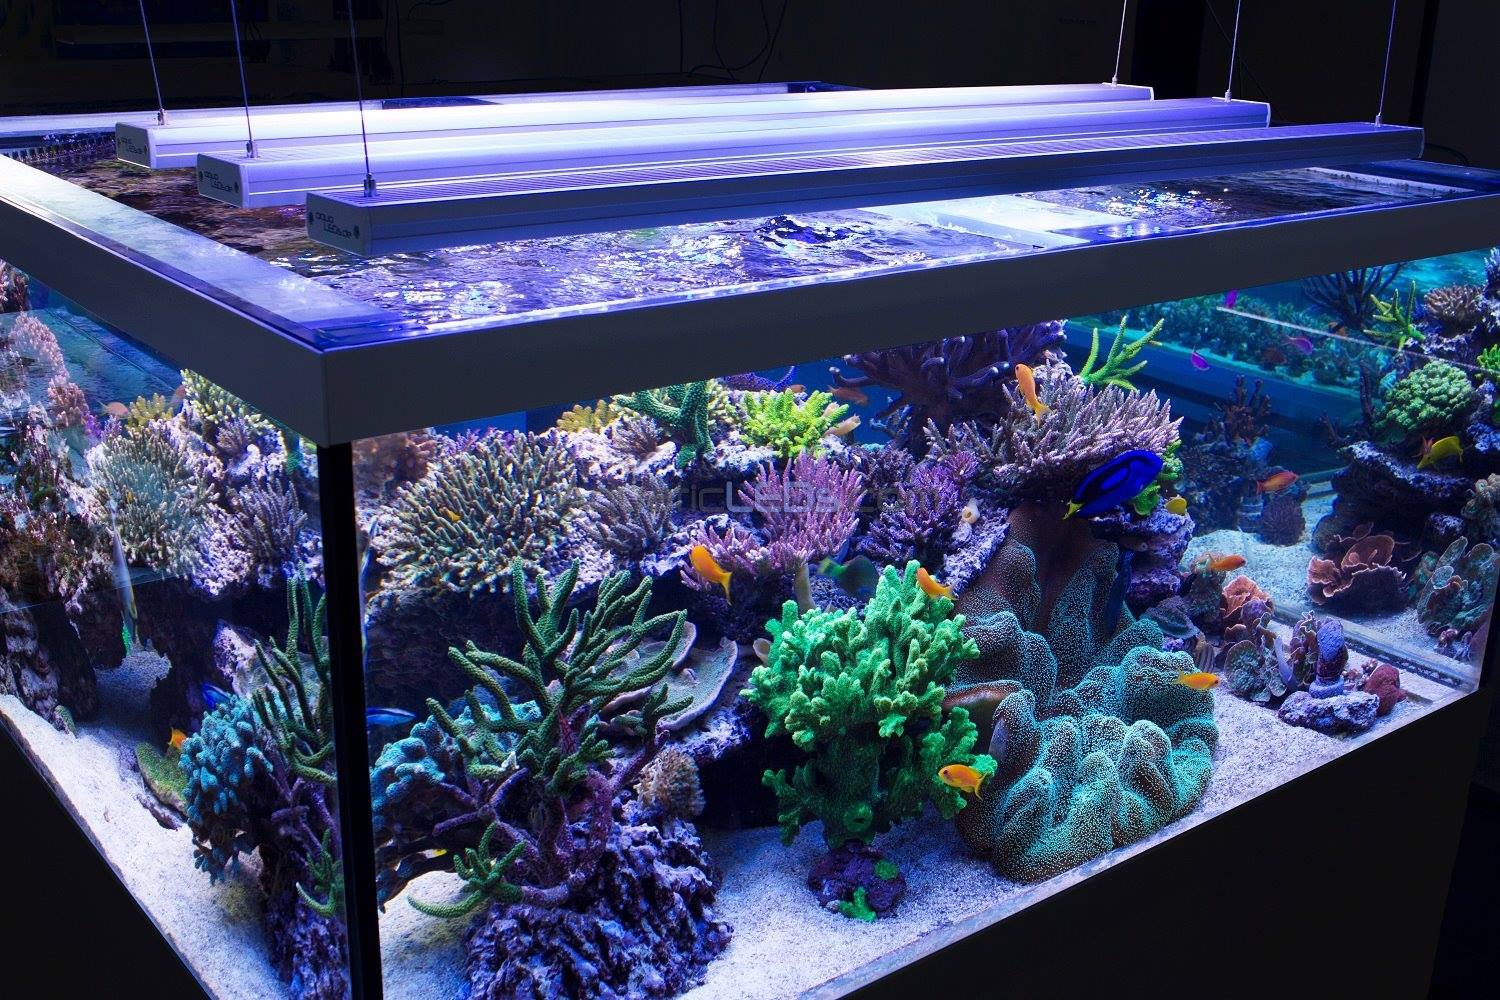 Top 5 Aquarium LED Lights - How To Choose The Right One For Your Tank